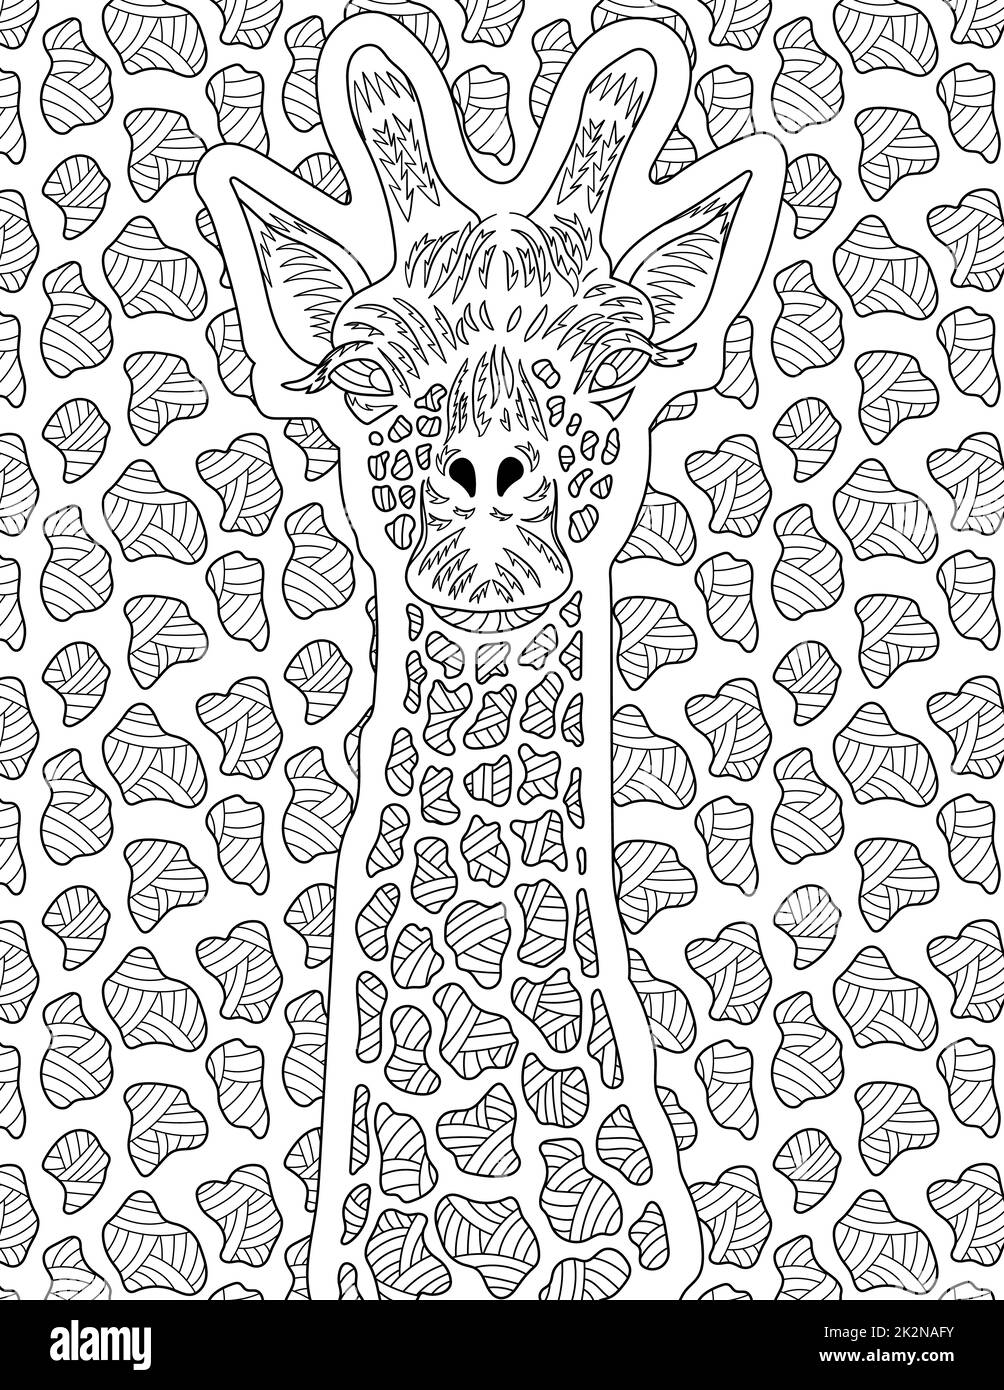 Abstract vector line drawing giraffe camouflaging patterned background. Digital lineart image tall neck animal textured. Outline artwork design textured creature. Stock Photo